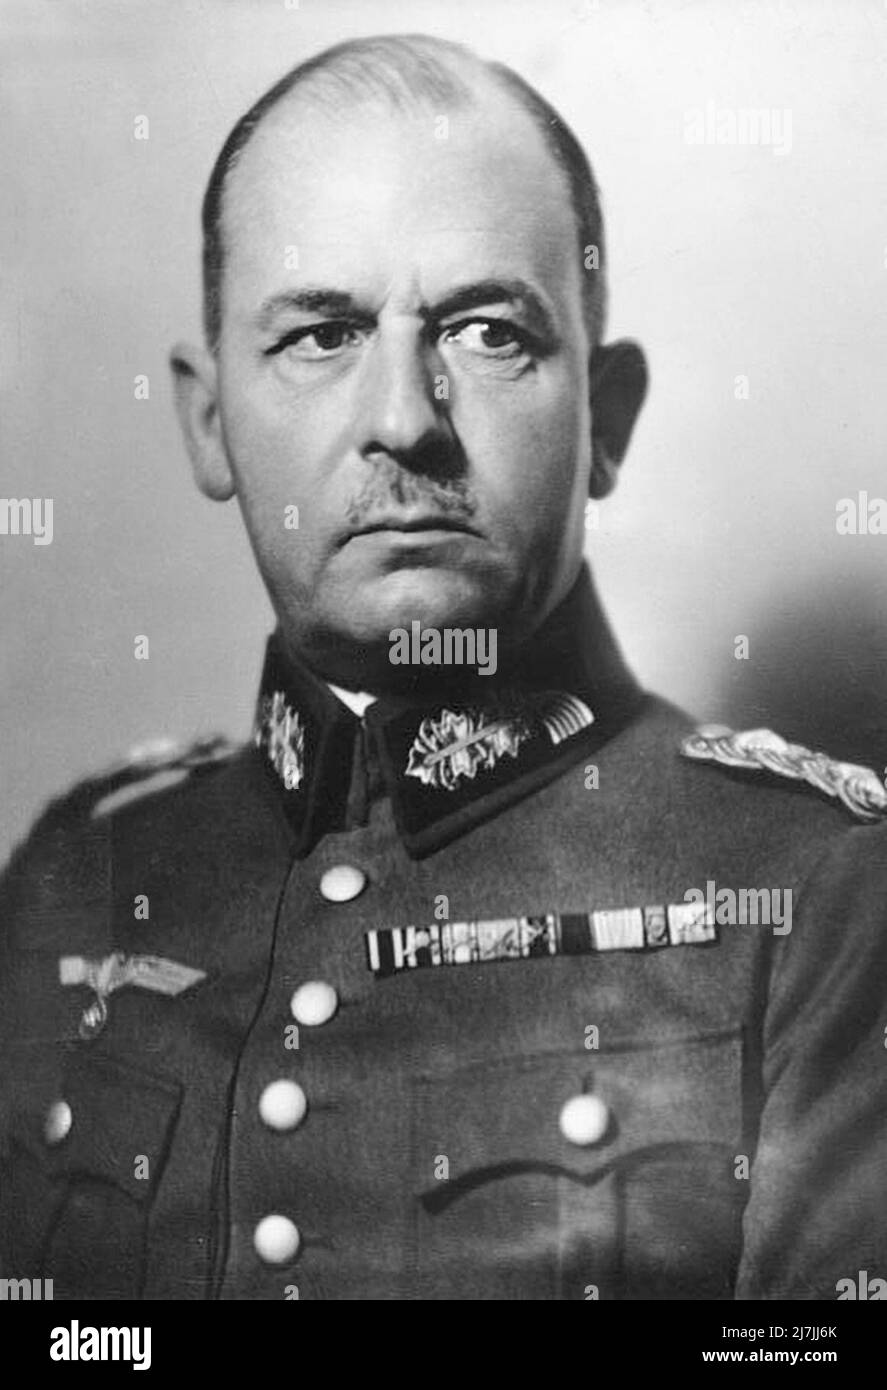 A portrait of Wermacht Field Marshal Wilhelm List. List commanded the 14th Army in the invasion of Poland and the 12th Army in the invasions of France, Yugoslavia and Greece. In 1941 he commanded the German forces in Southeast Europe responsible for the occupation of Greece and Yugoslavia. In July 1942 during Case Blue, the German summer offensive in Southern Russia, he was appointed commander of Army Group A,. Stock Photo